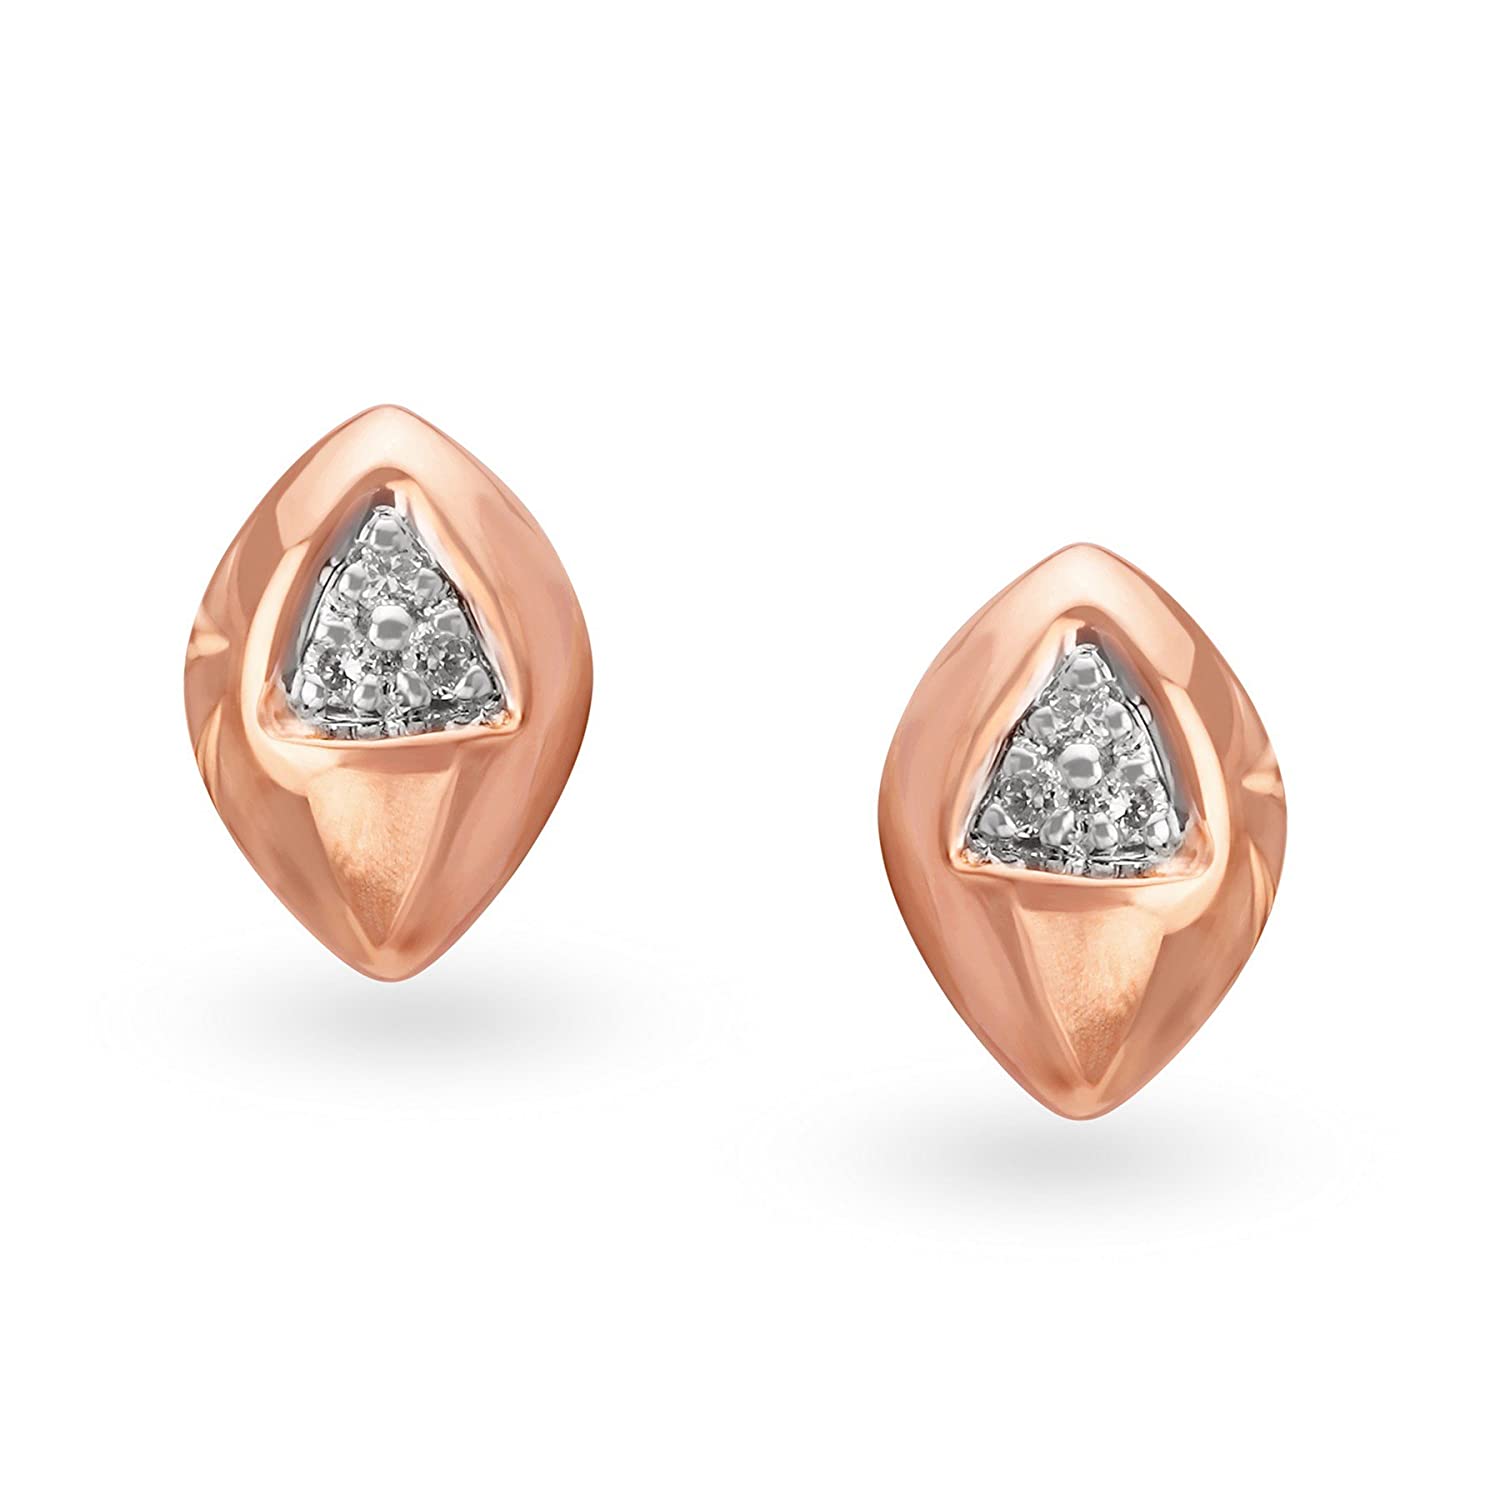 Mia By Tanishq 18kt Rose Gold Sea Shell-Like Earrings | Earrings, Gorgeous  earrings, Rose gold earrings